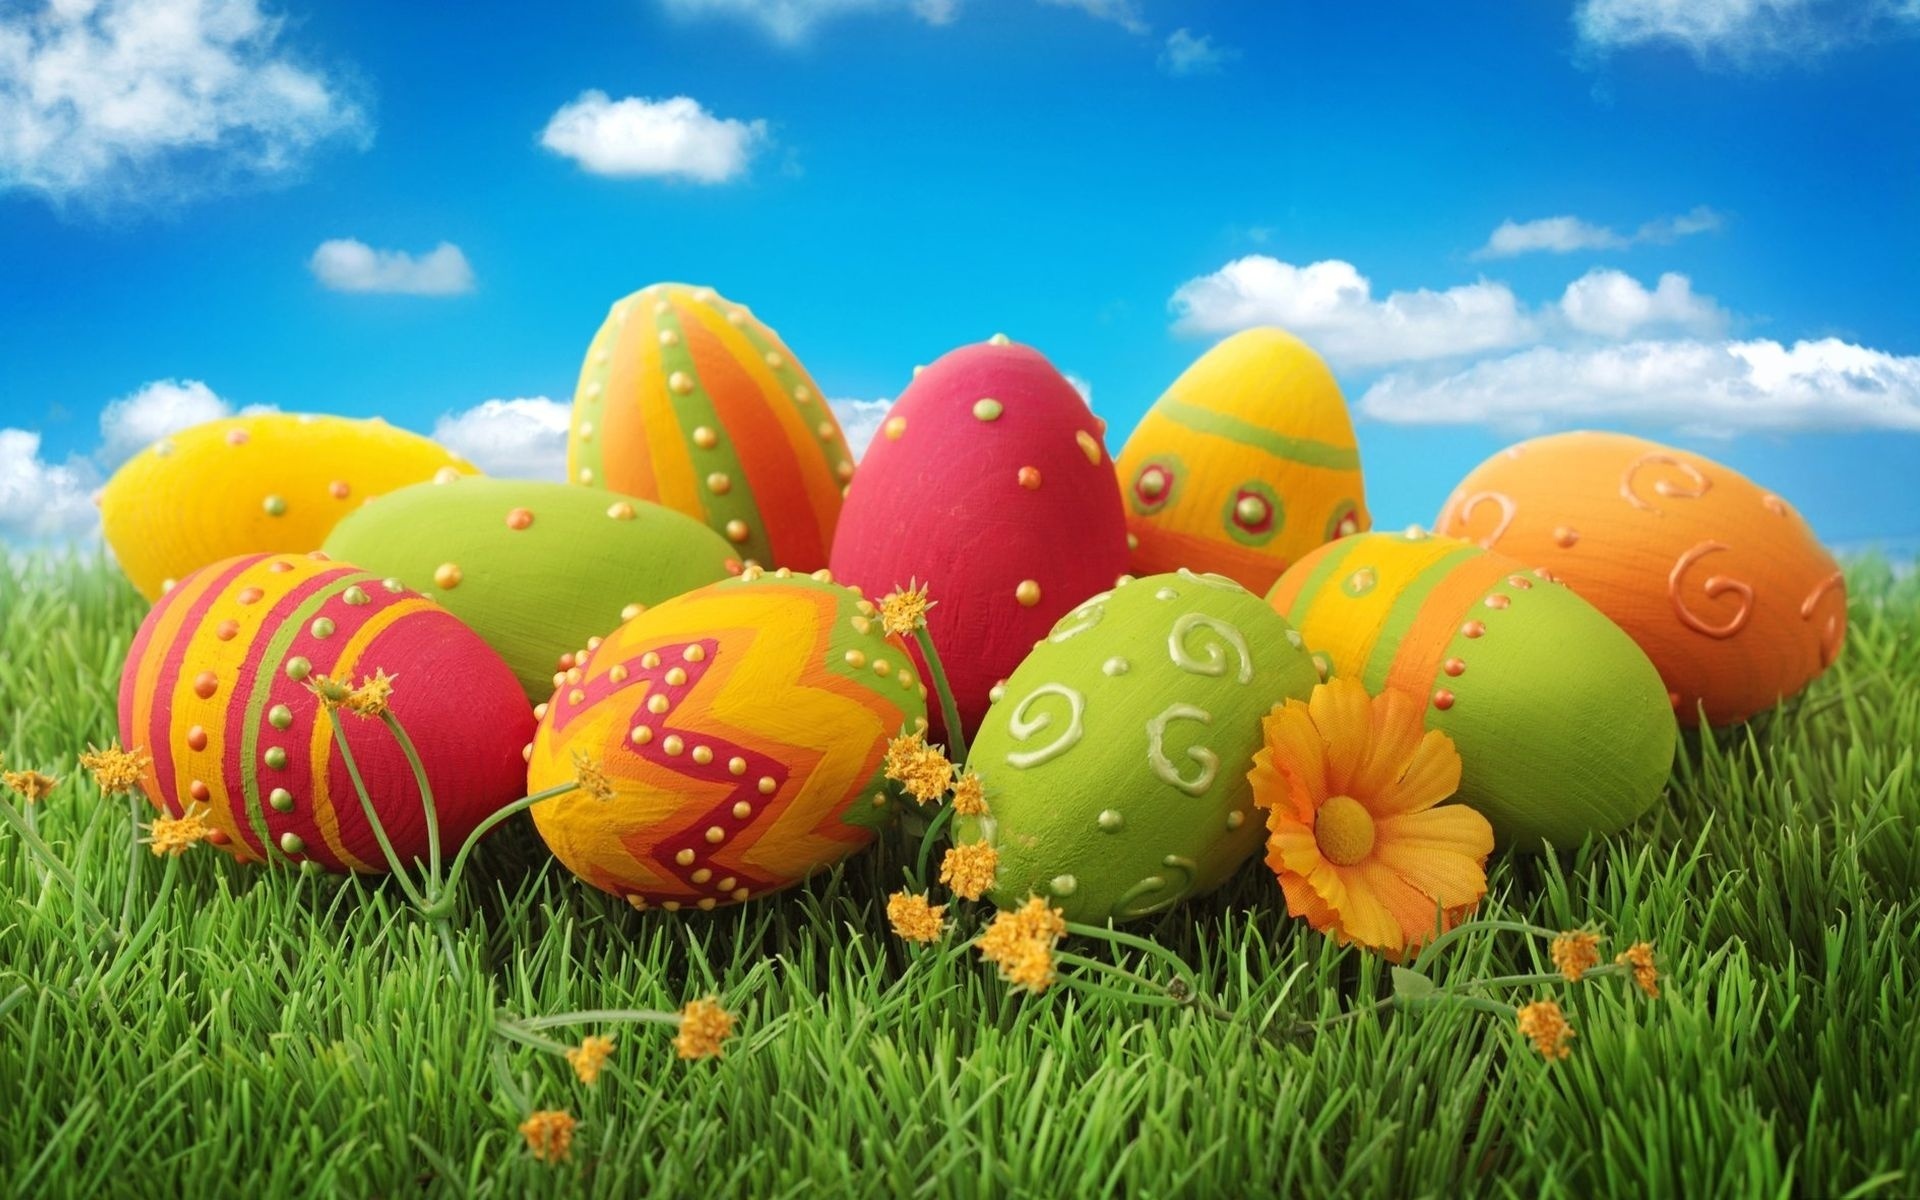 easter images eggs colorful